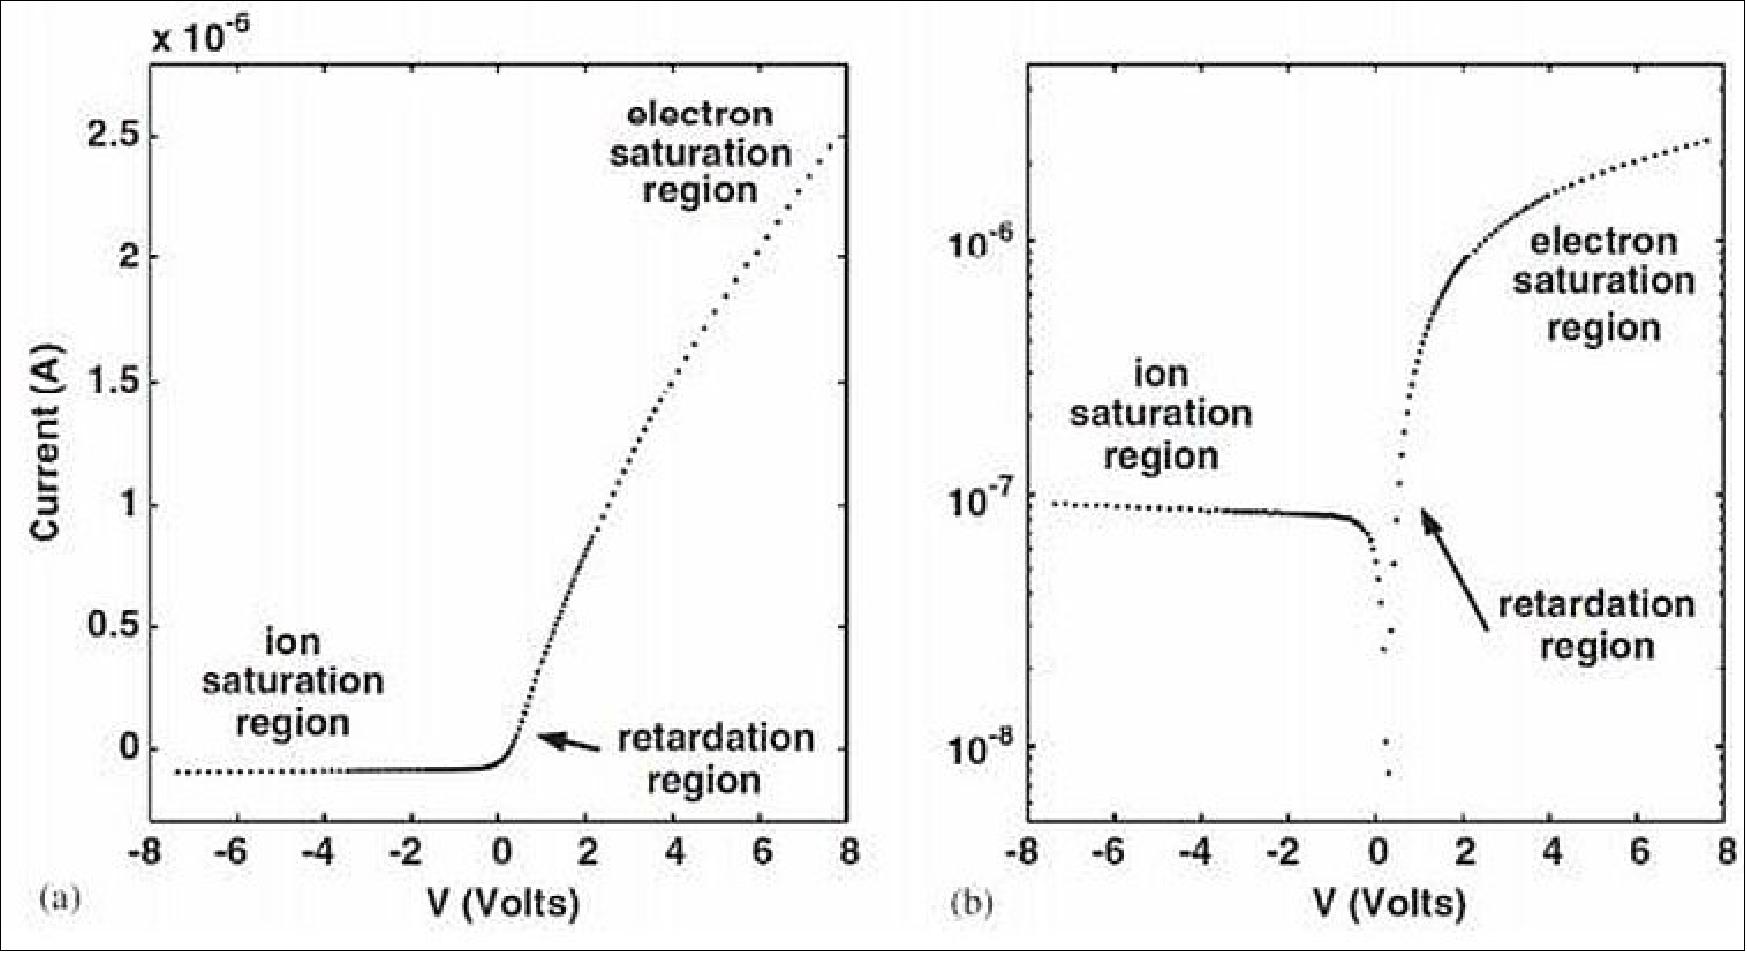 Figure 13: Typical Langmuir probe characteristics in linear (left) and logarithmic (right) current axis (image credit: BIRA)